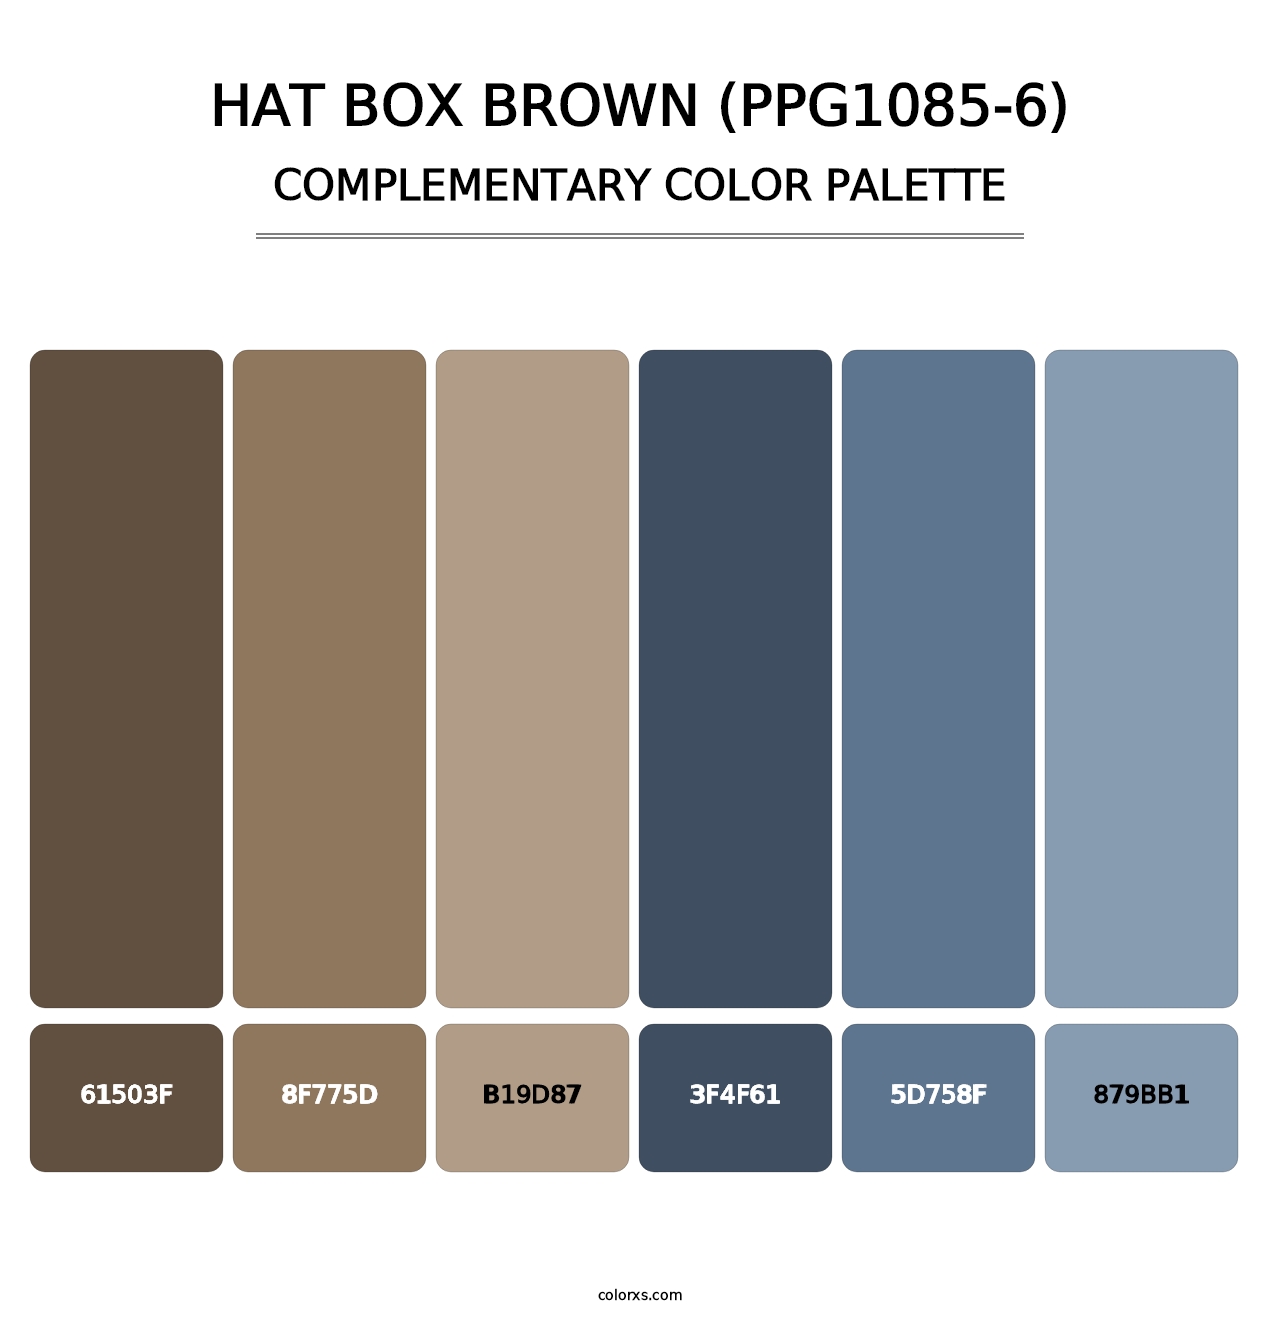 Hat Box Brown (PPG1085-6) - Complementary Color Palette